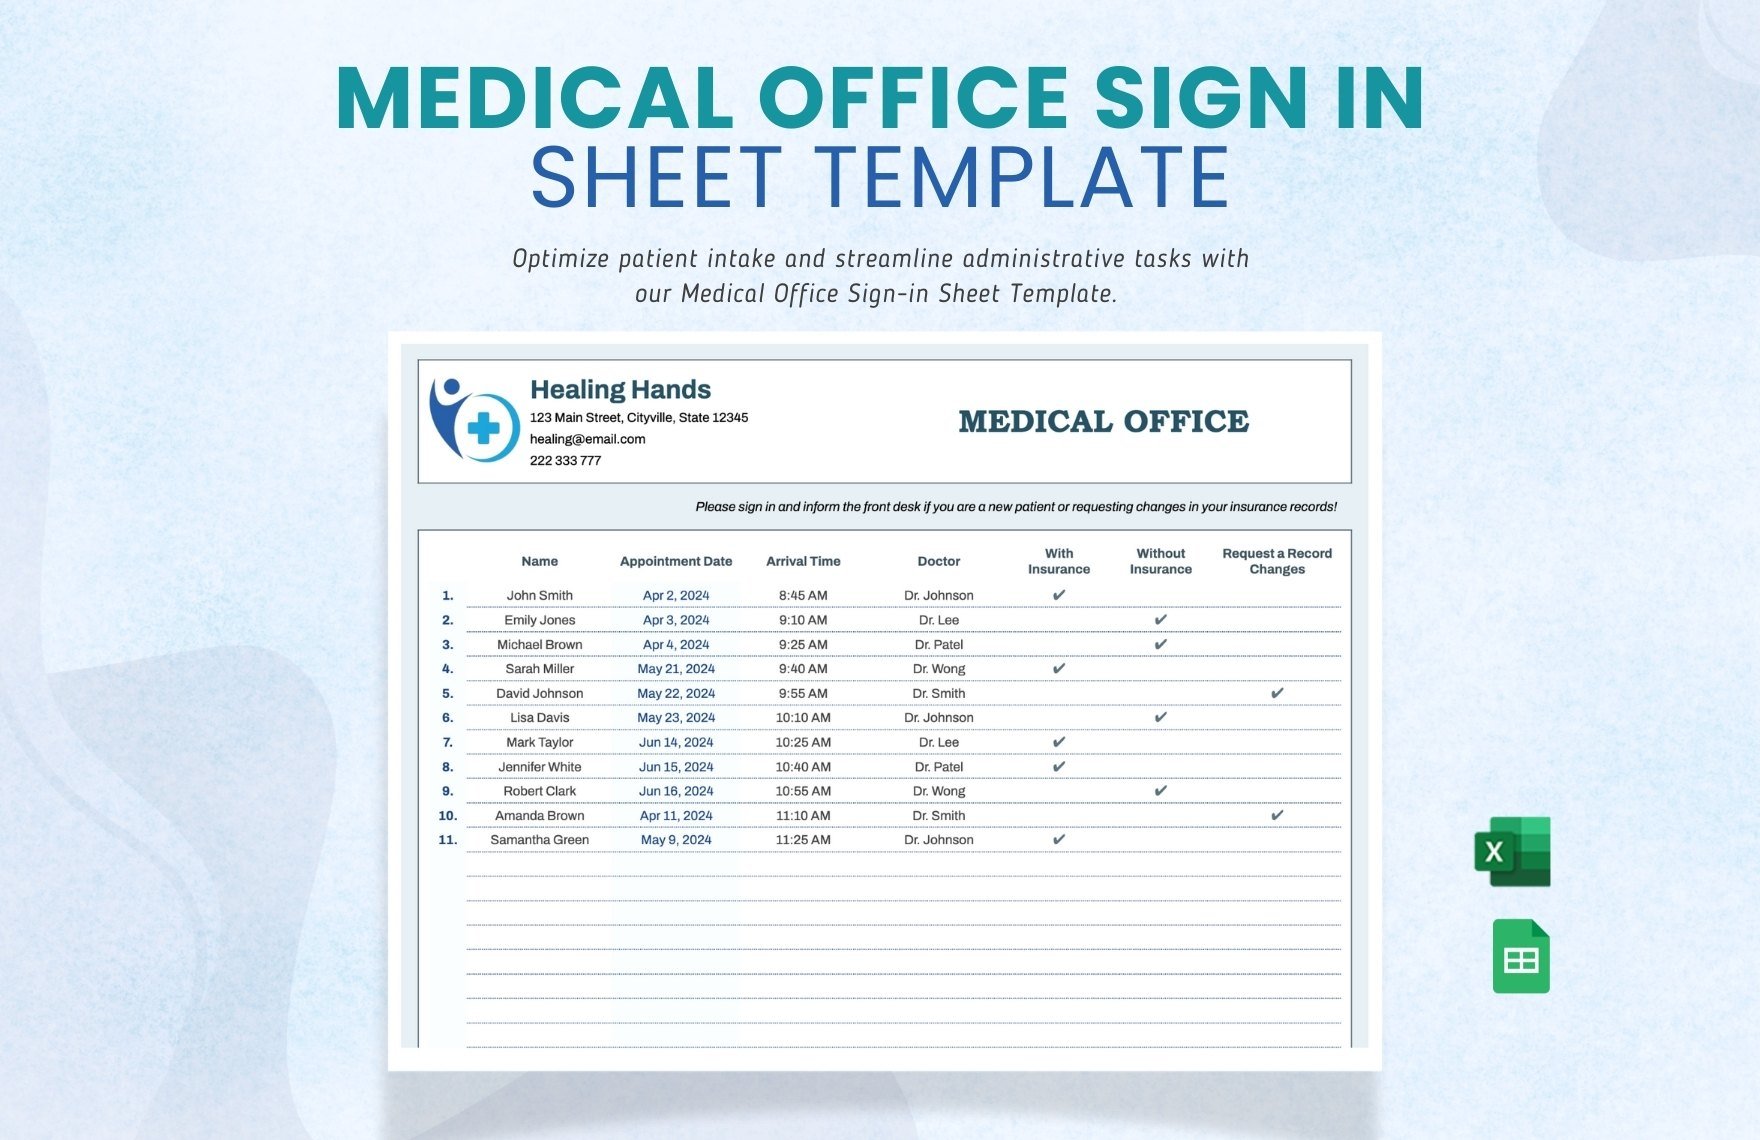 Medical Office Sign in Sheet Template in Excel, Google Sheets